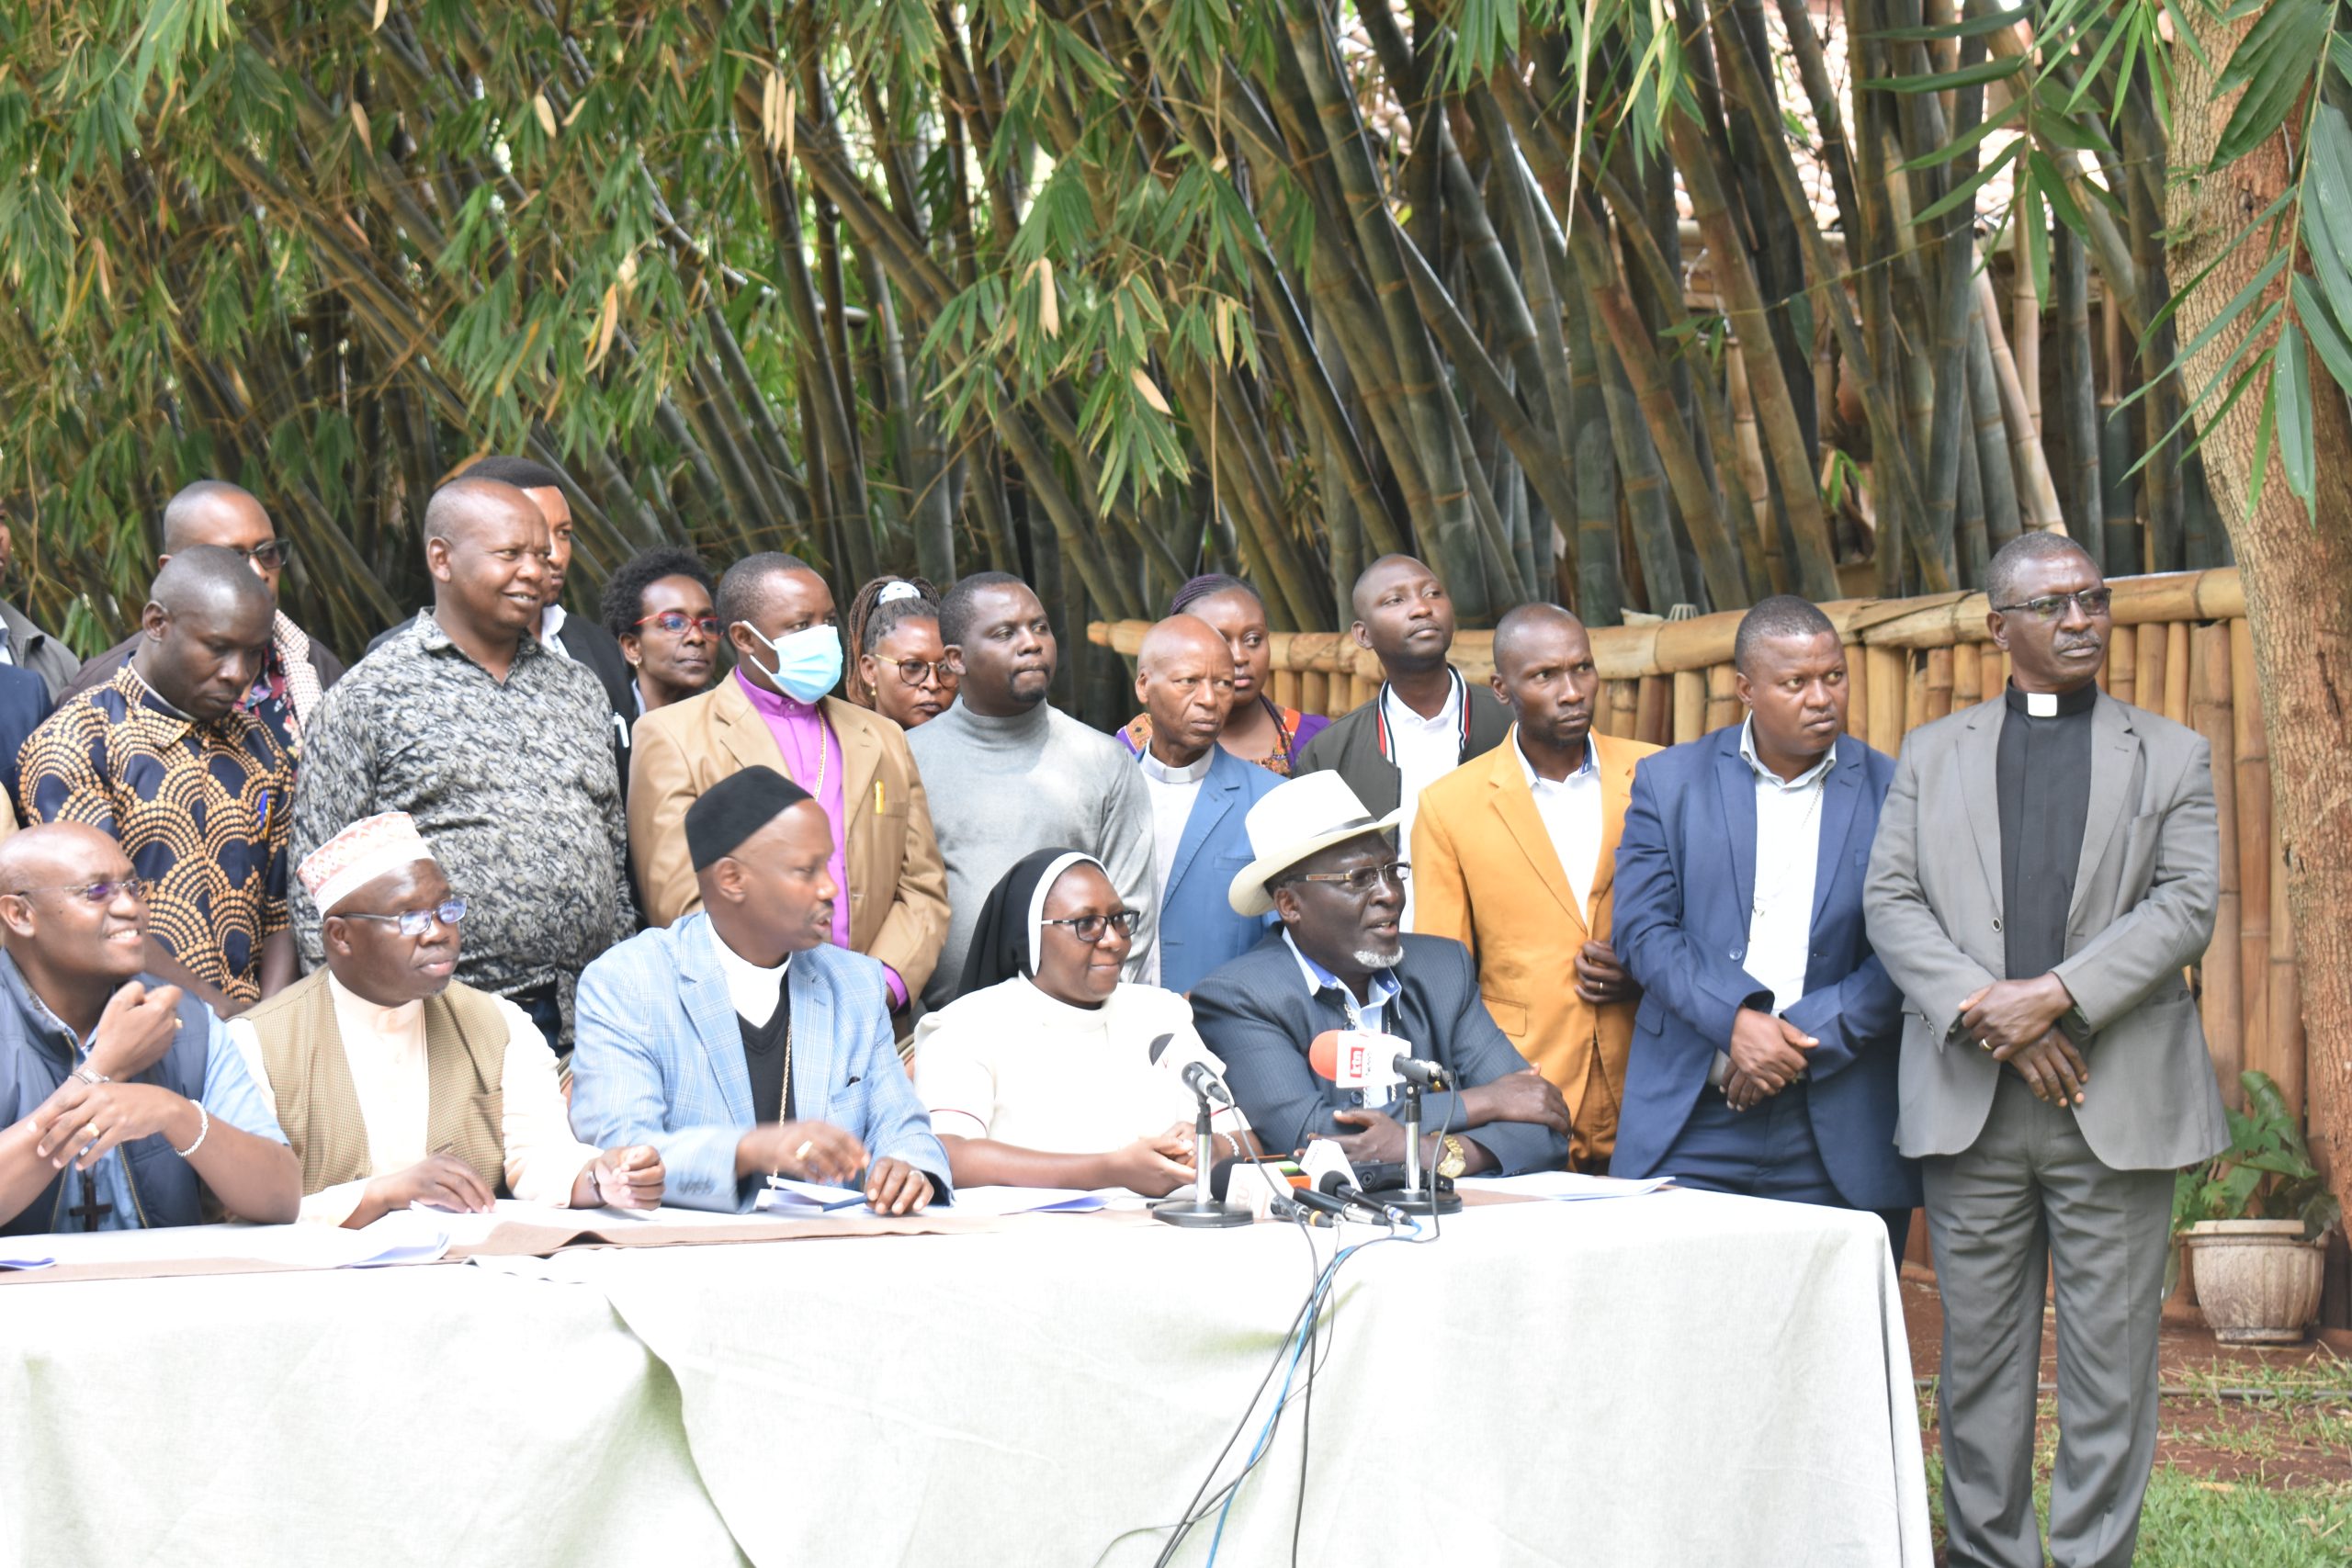 Press statement on 9th Nov 2022 by Religious Leaders – A call to reinstate the Ban on GMOs in Kenya